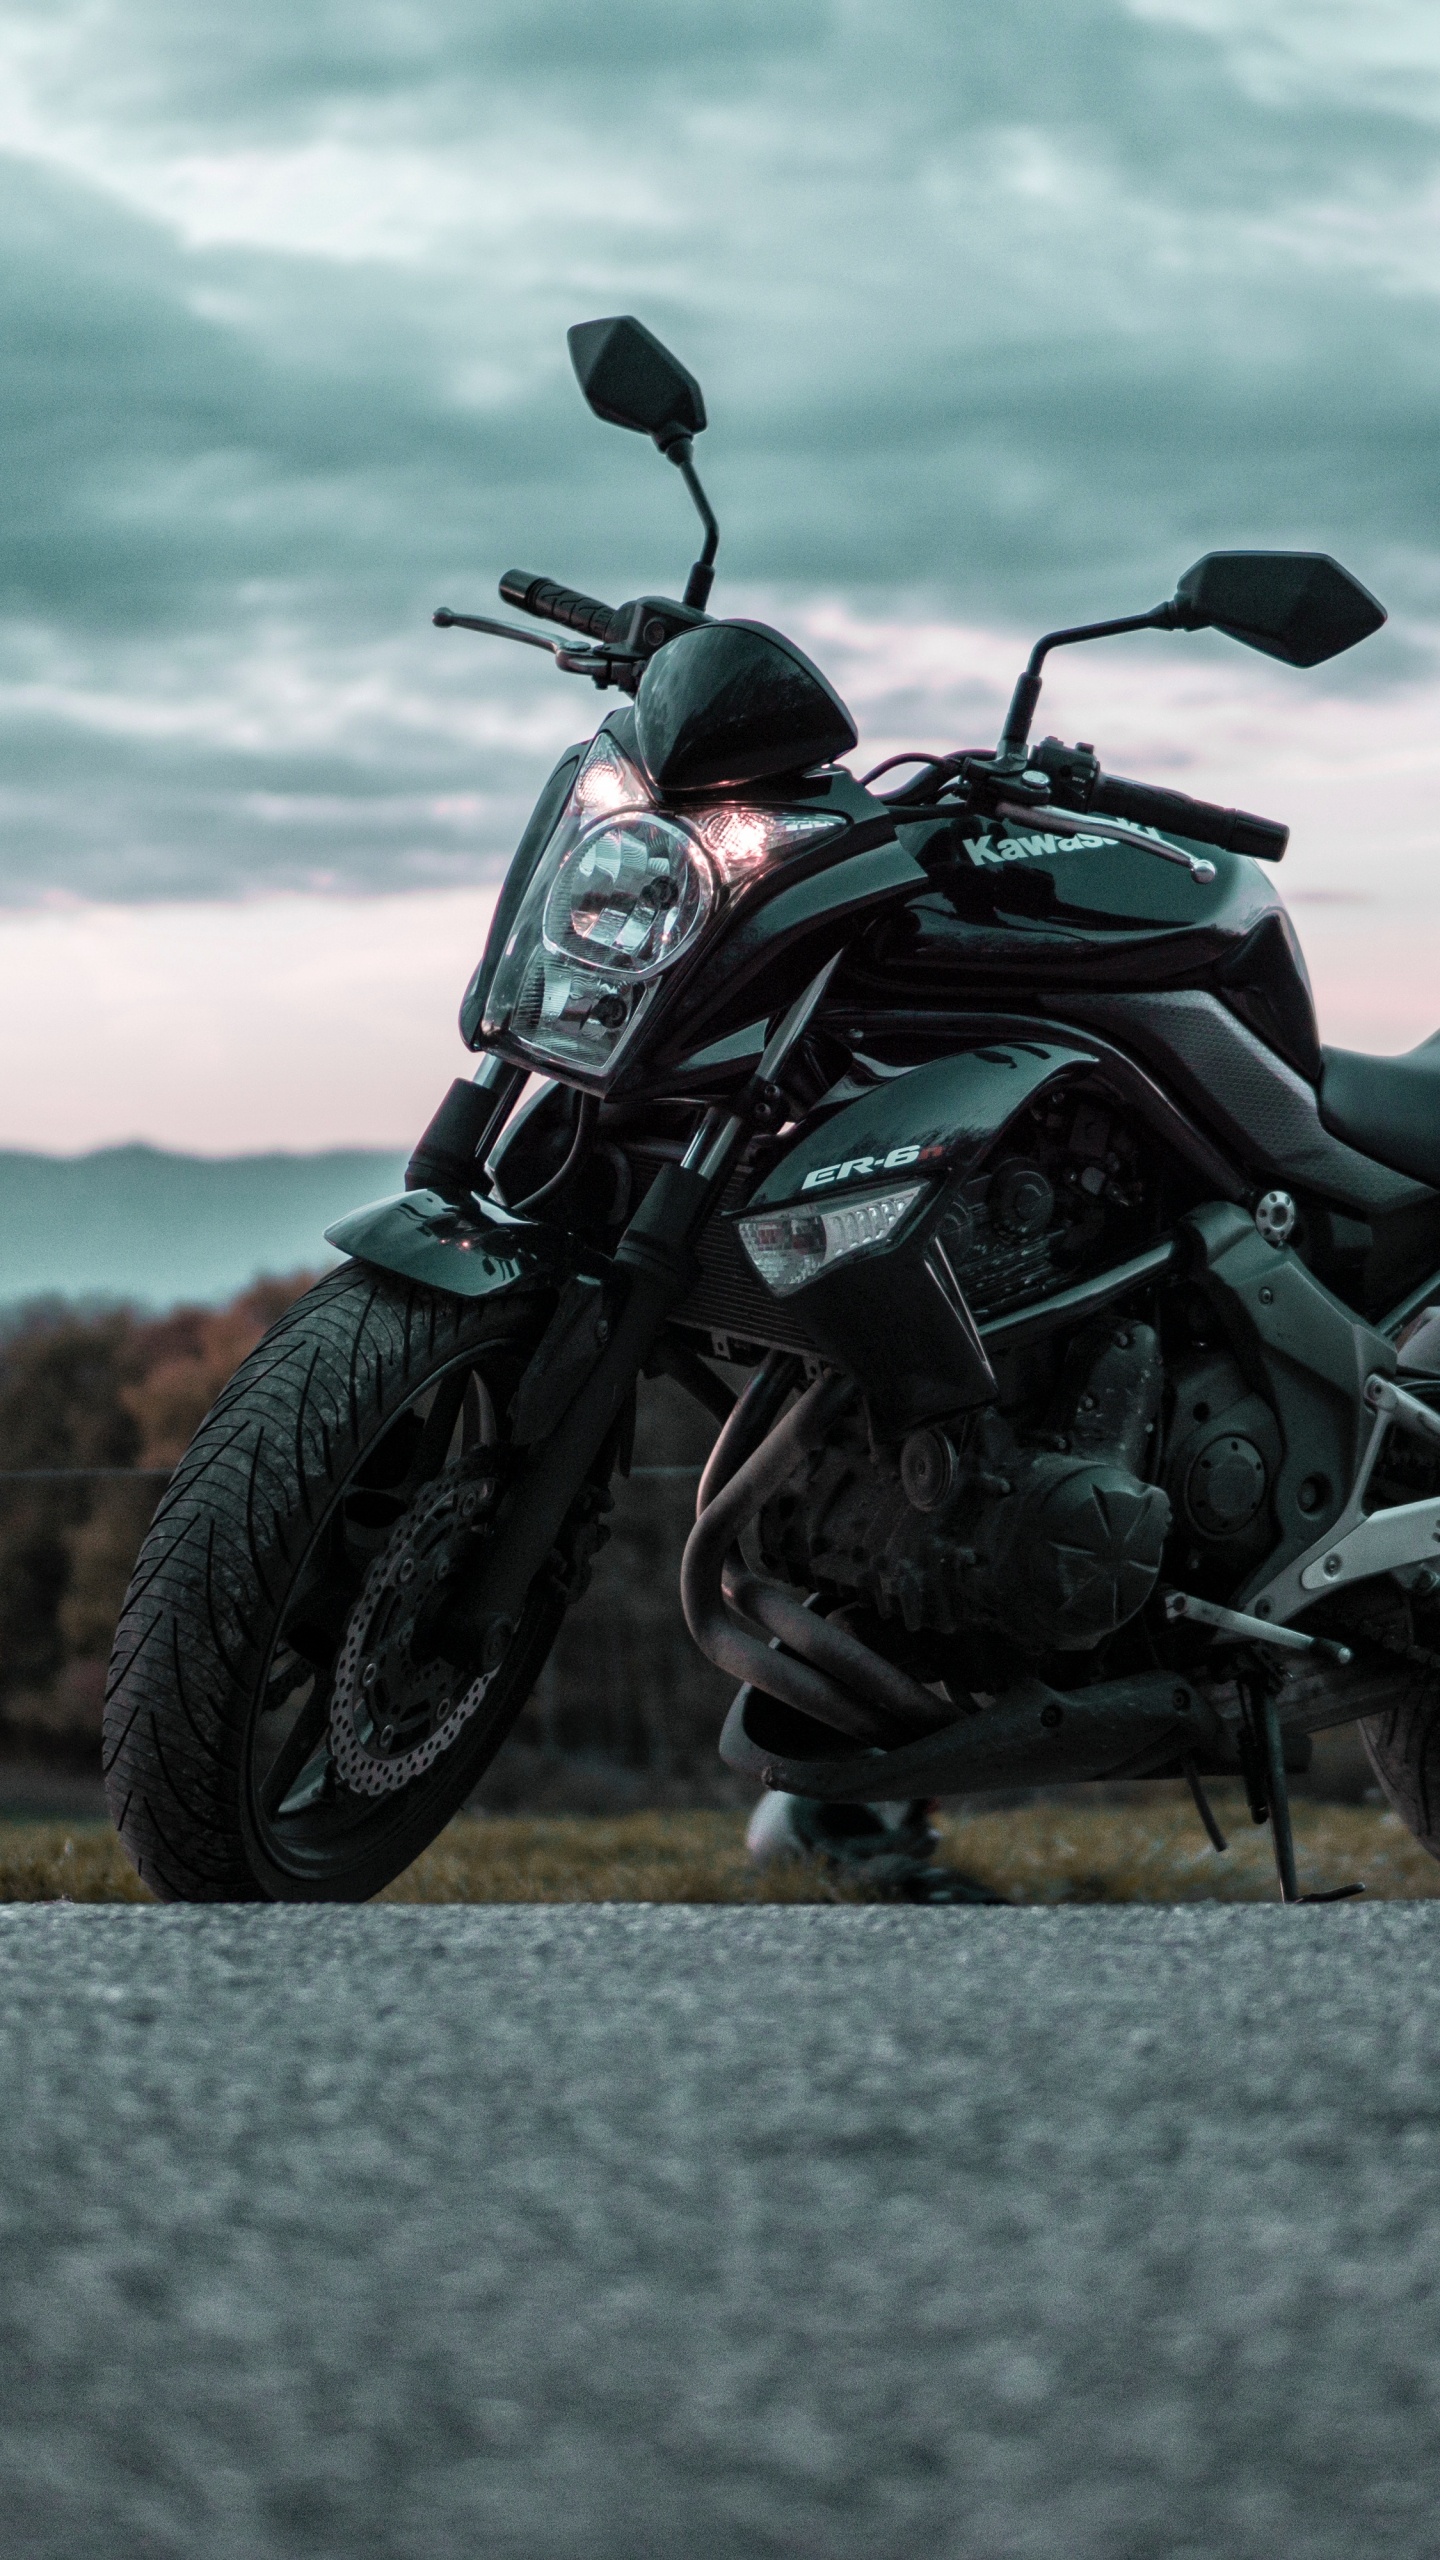 Black and Gray Motorcycle on Gray Asphalt Road During Daytime. Wallpaper in 1440x2560 Resolution